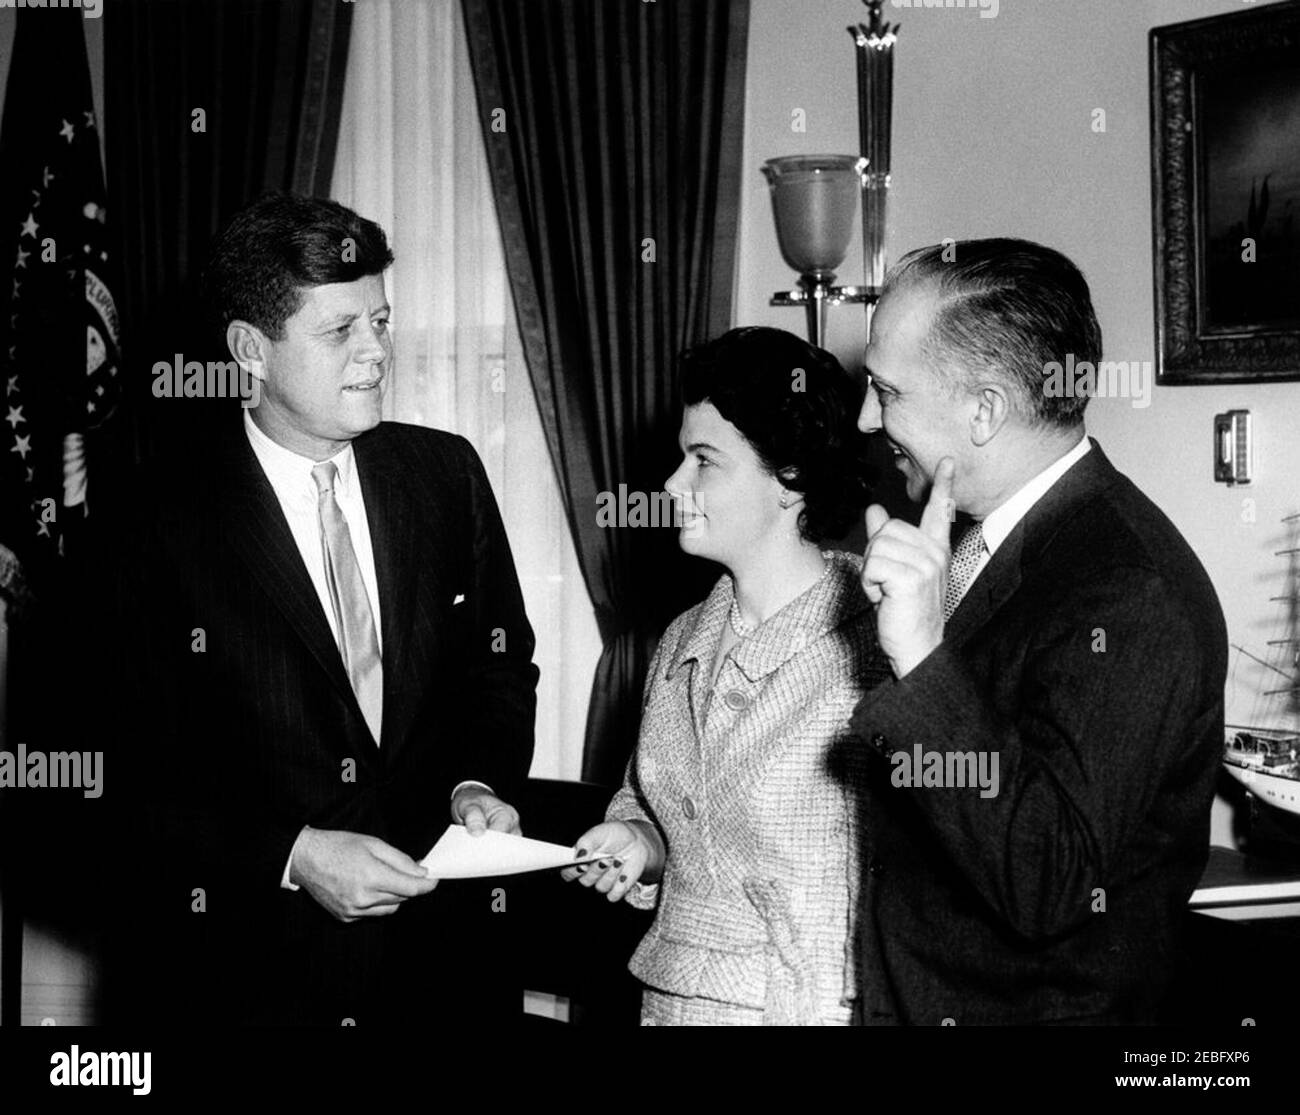 Visit of representatives of the National Symphony Orchestra (NSO) Fund Campaign, 12:20PM. Visit of representatives of the National Symphony Orchestra Fund Campaign. President John F. Kennedy speaks with National Symphony Orchestra representatives in connection with the Kick-Off of the 1961 Sustained Fund Campaign. President Kennedy; Campaign Publicity Director, Helen Dudman; Conductor Howard Mitchell. Oval Office, White House, Washington, D.C. Stock Photo